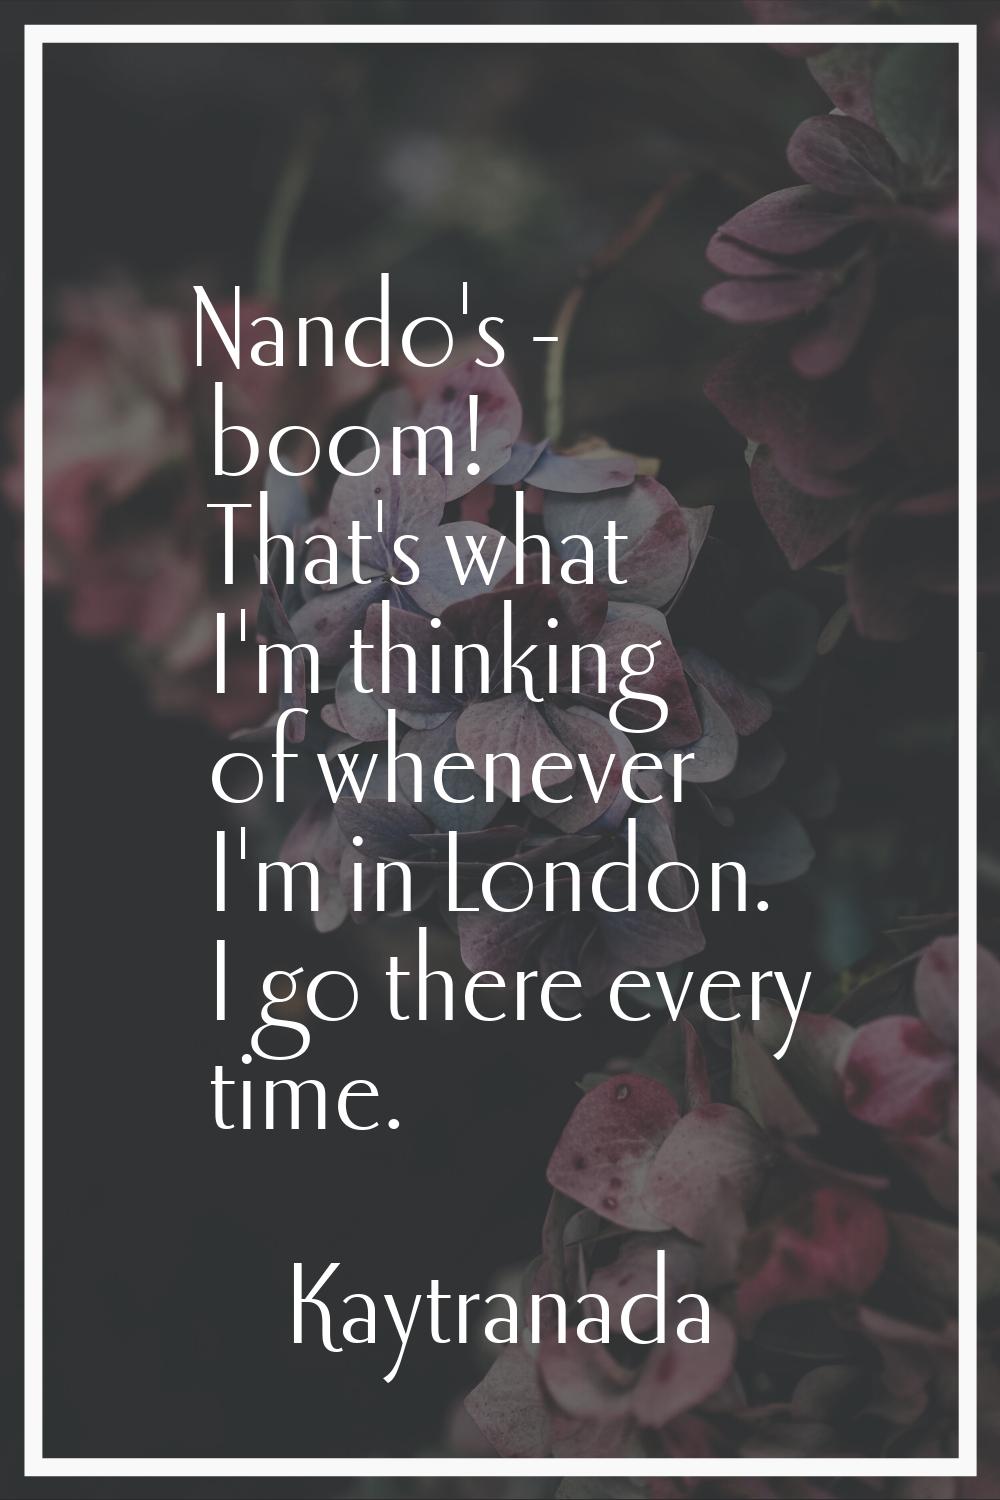 Nando's - boom! That's what I'm thinking of whenever I'm in London. I go there every time.